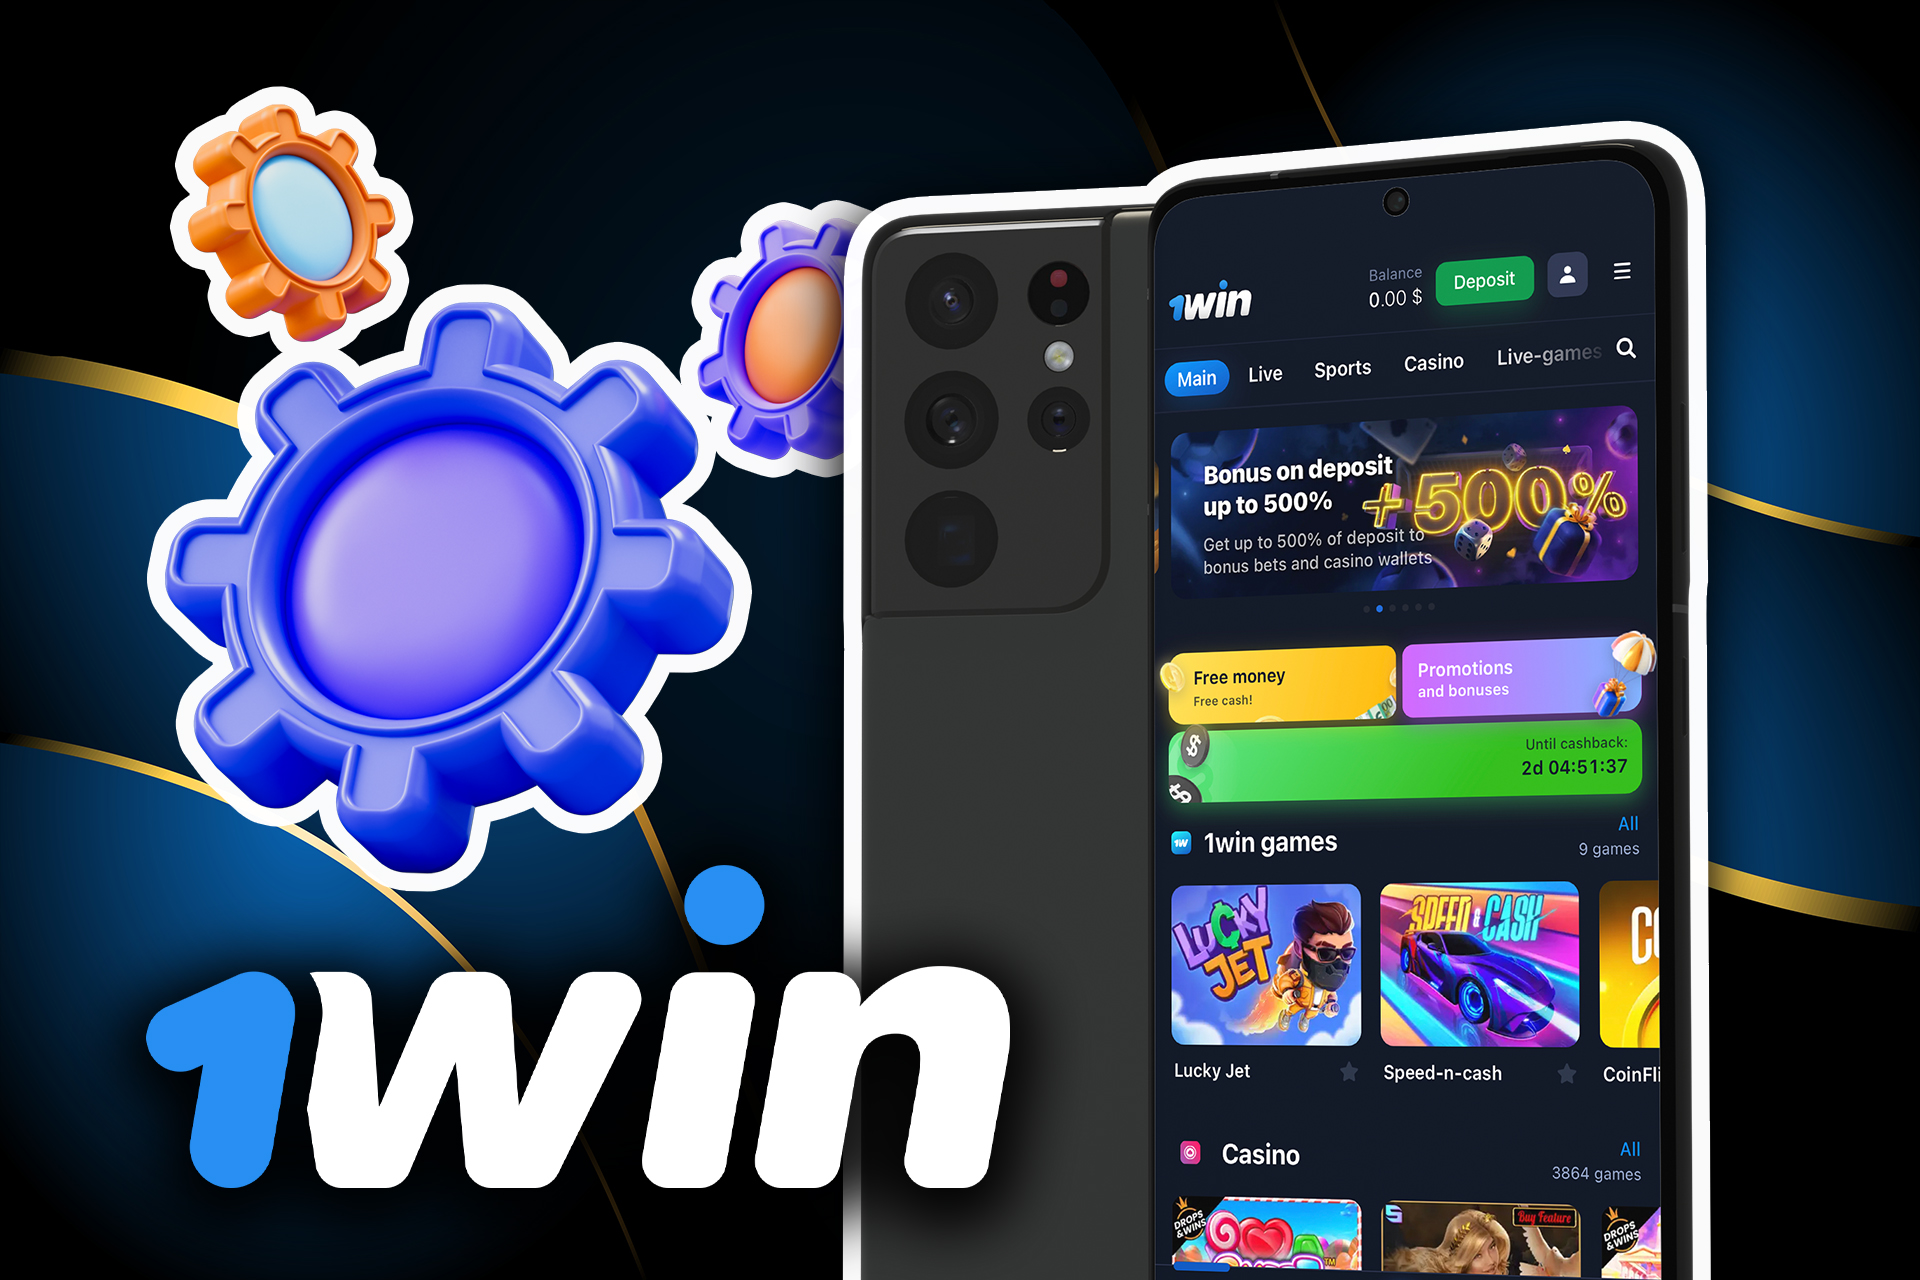 Finish the download and install the 1win app on you smartphone.